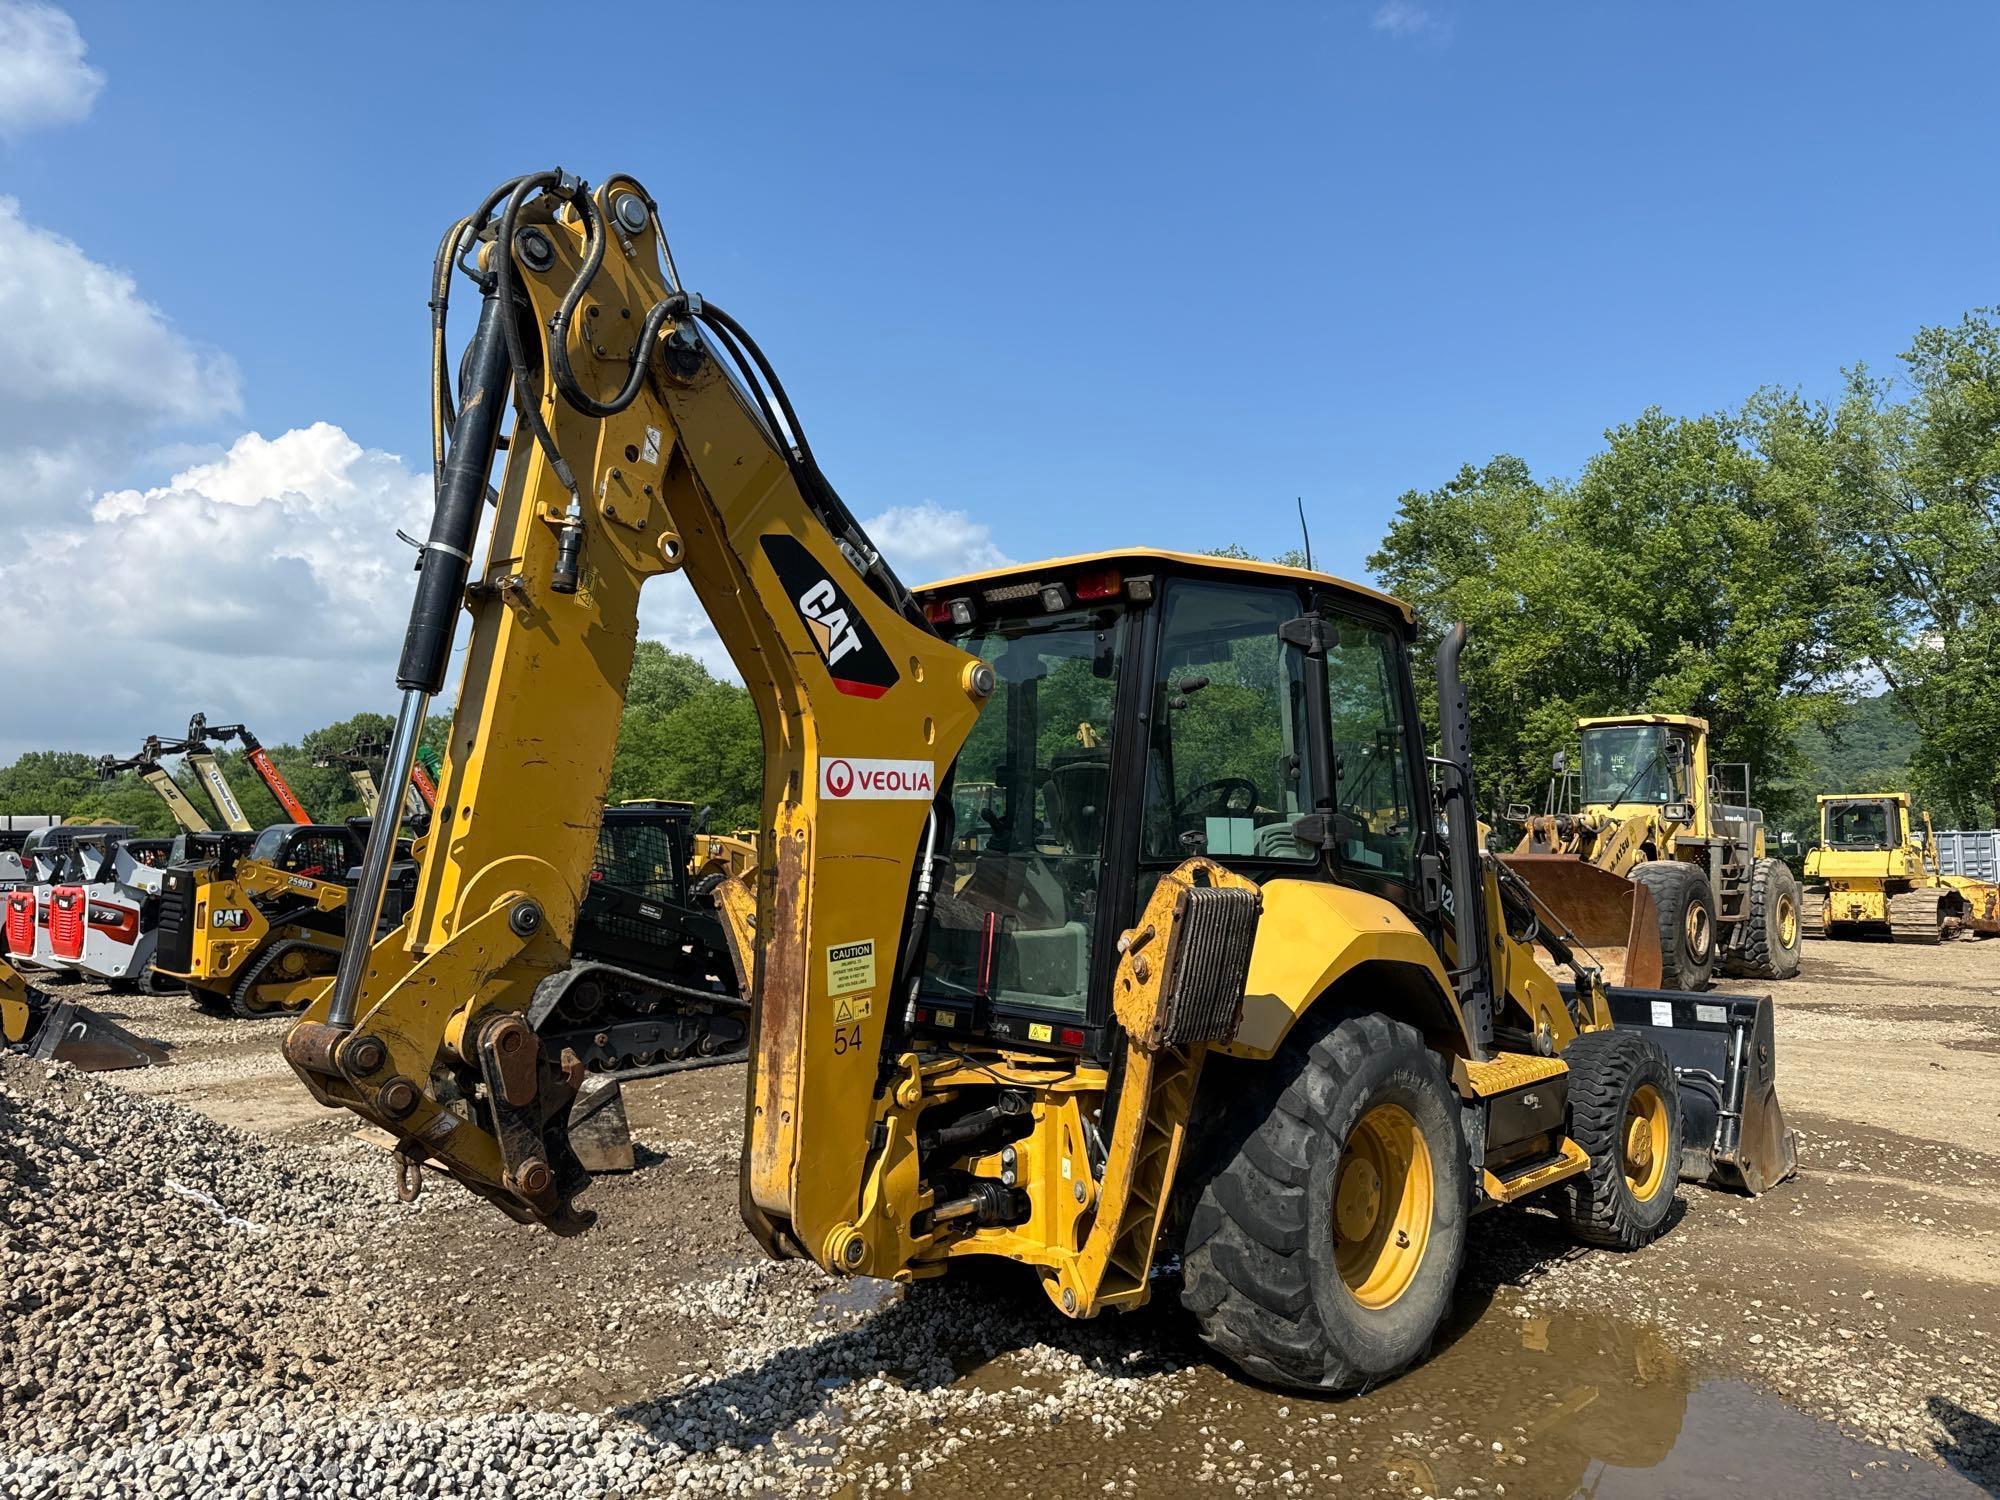 2017 CAT 420F2IT TRACTOR LOADER BACKHOE SN:THWD02000 4x4, powered by Cat diesel engine, equipped